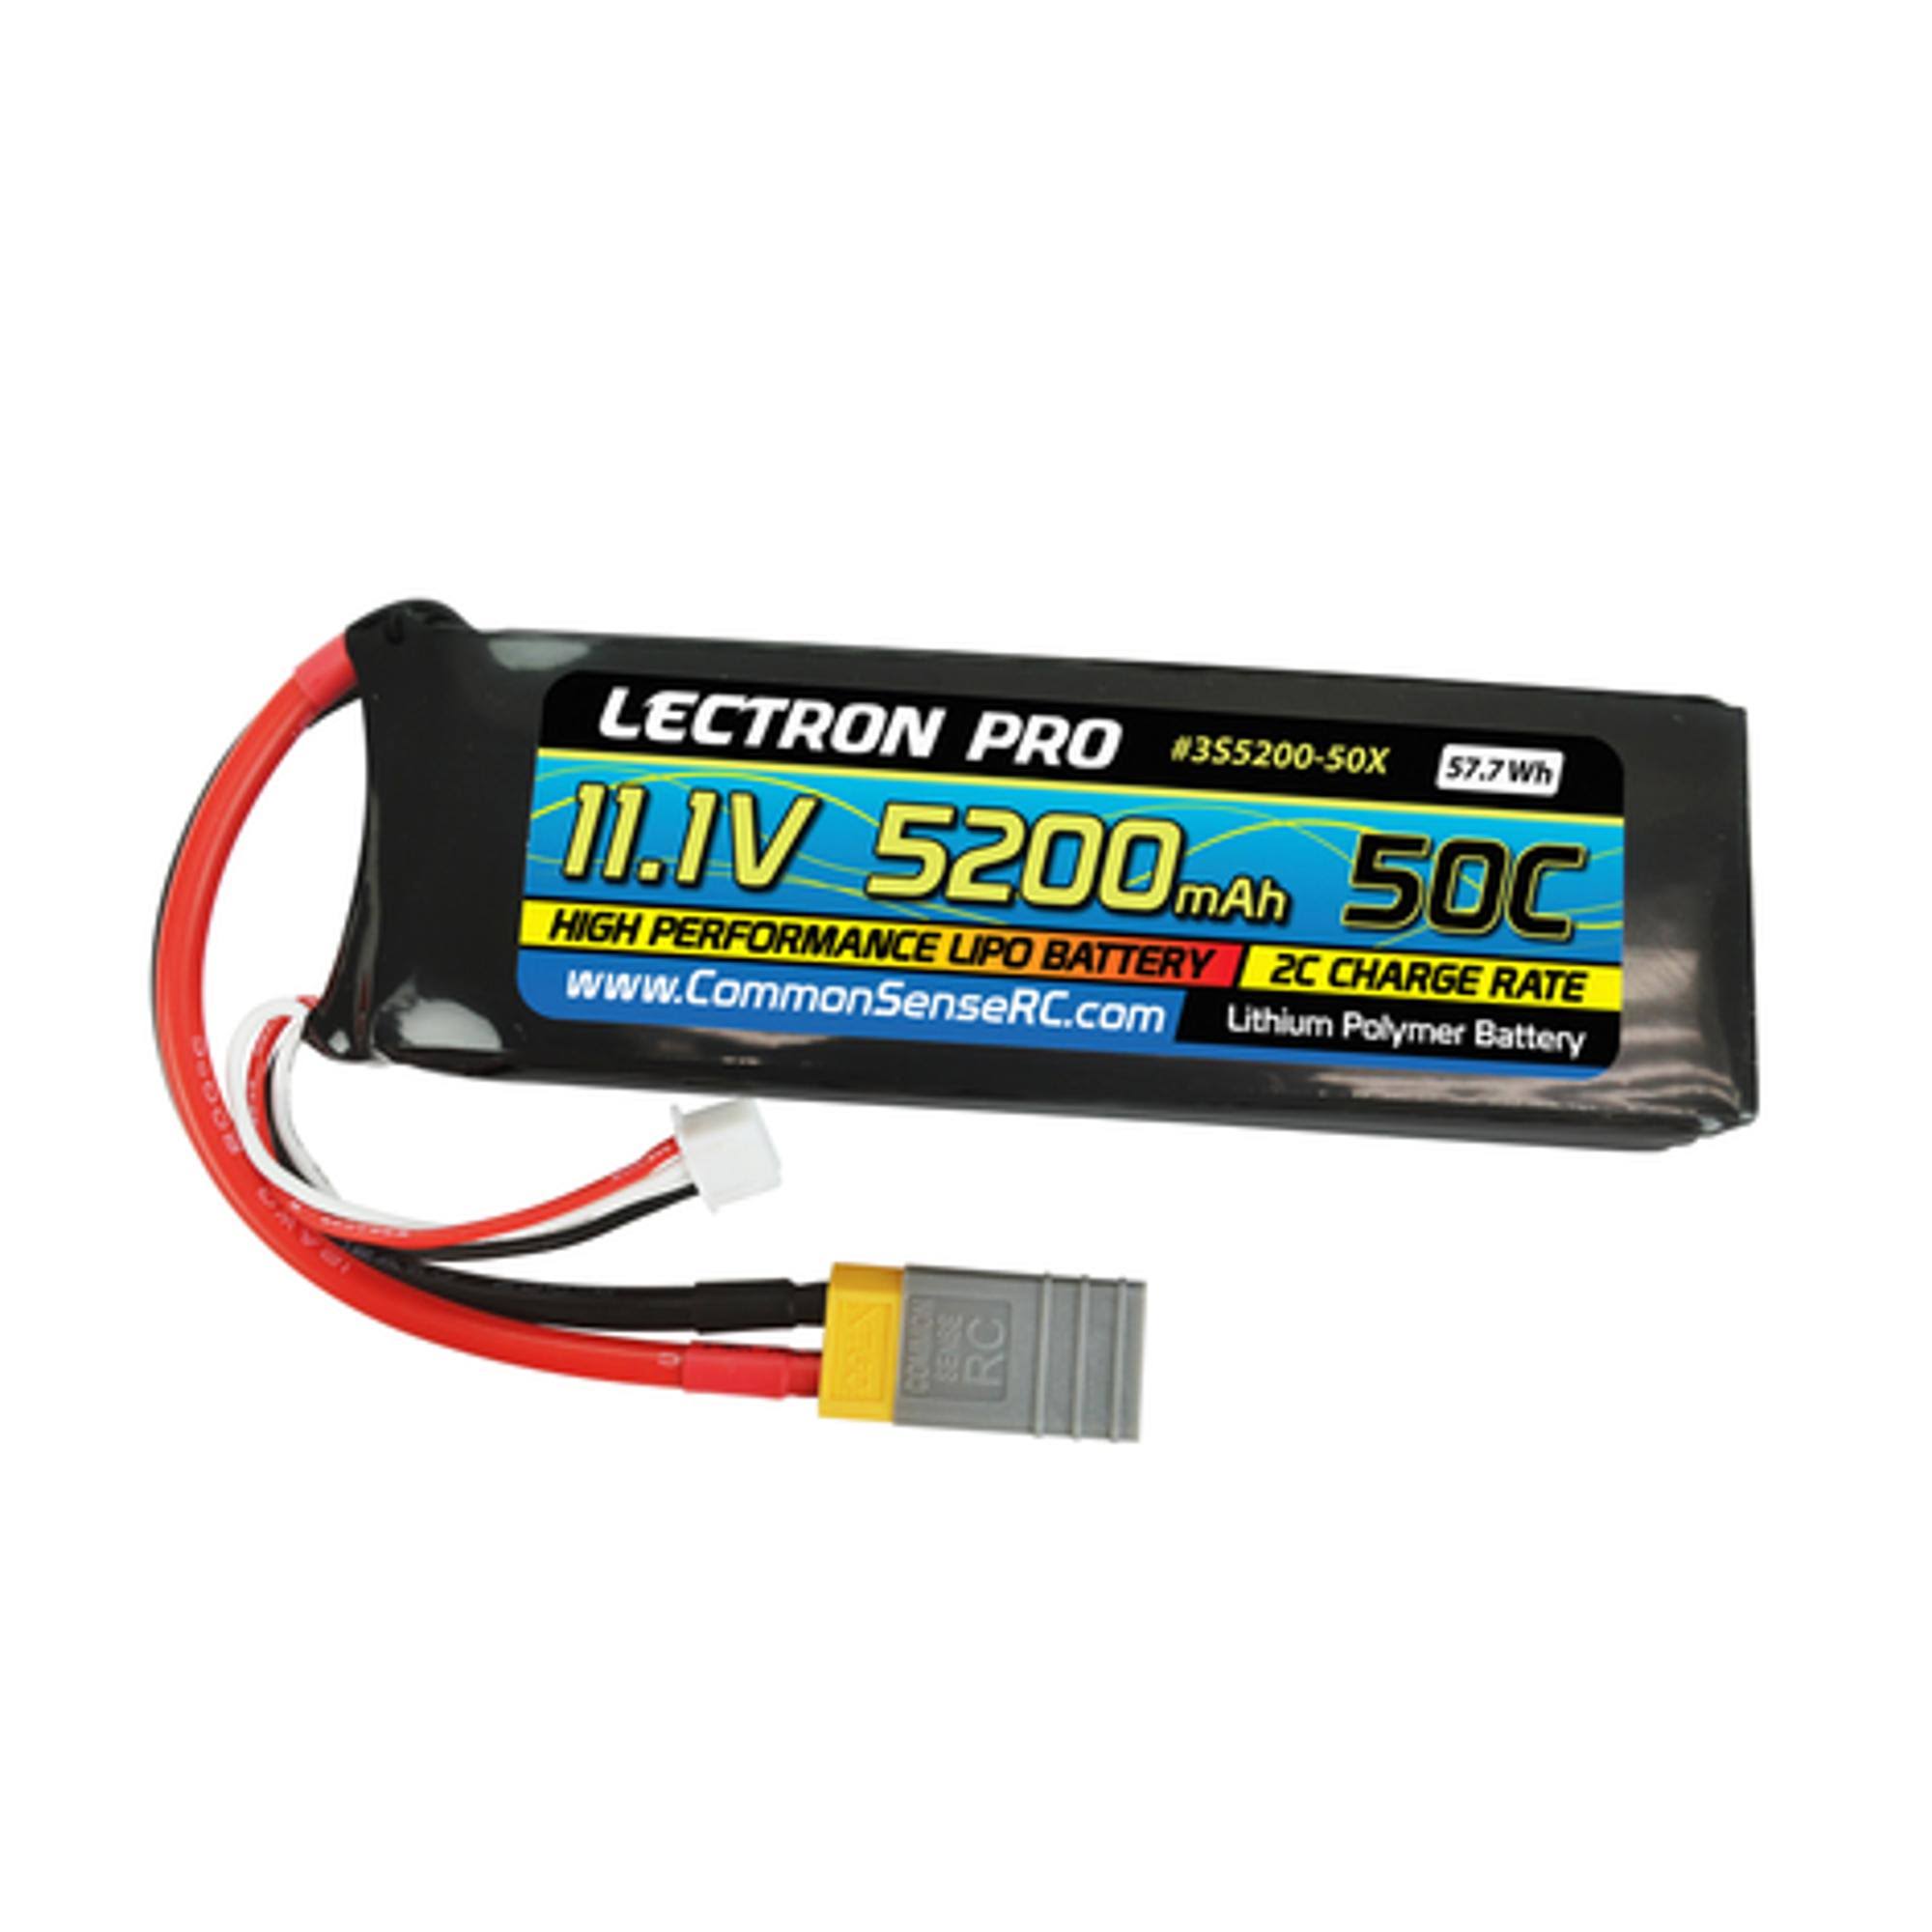 (with XT60 Connector + CSRC Adapter) - Lectron Pro 11.1V 5200mAh 50C Lipo